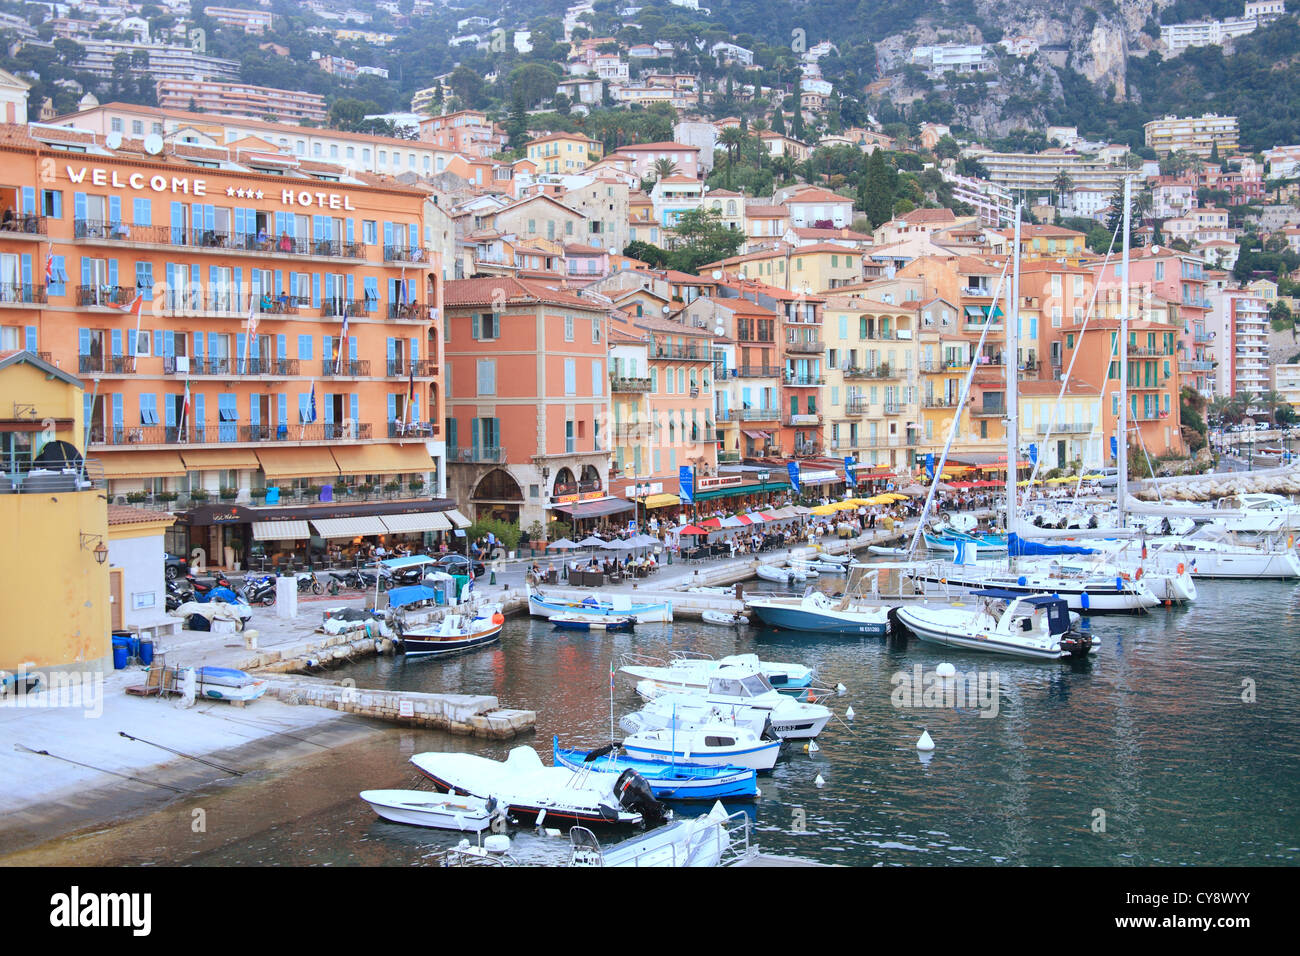 The colorful fishing village of Villefranche sur mer Stock Photo